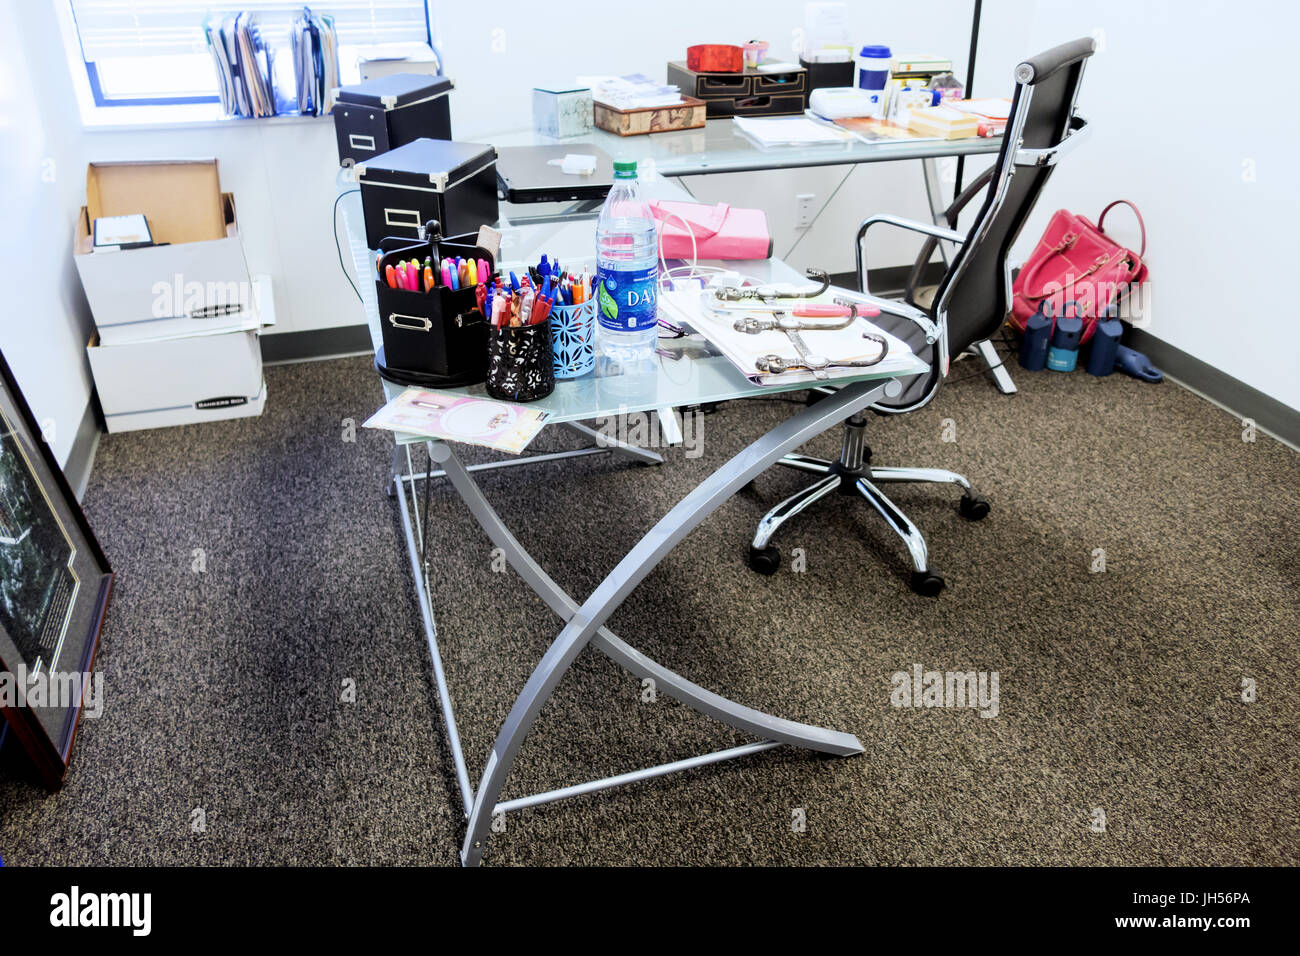 A cluttered office desk. Stock Photo